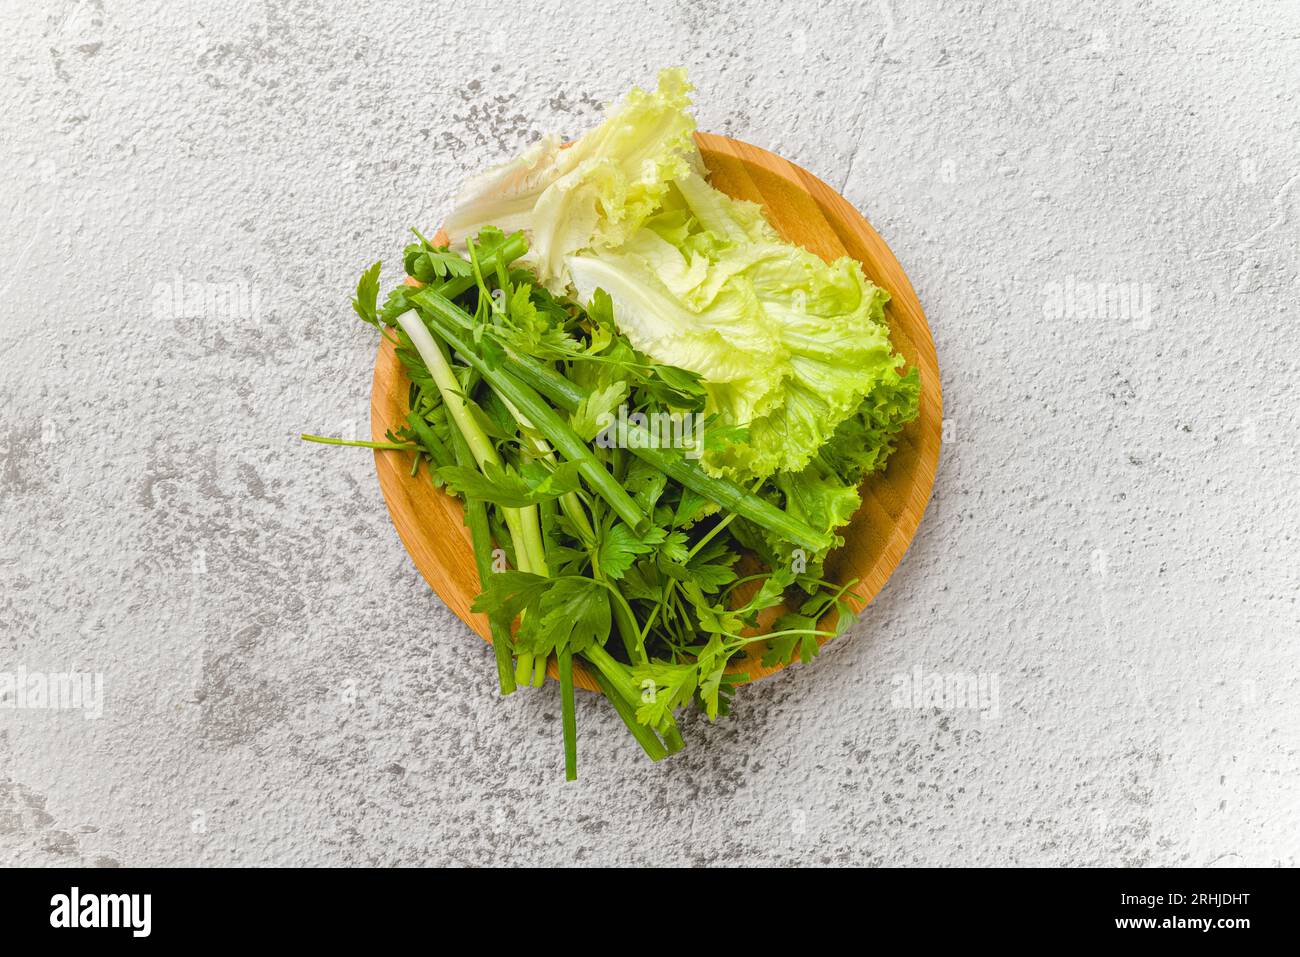 Organic green onions, chives, lettuce and parsley on stone table Stock Photo